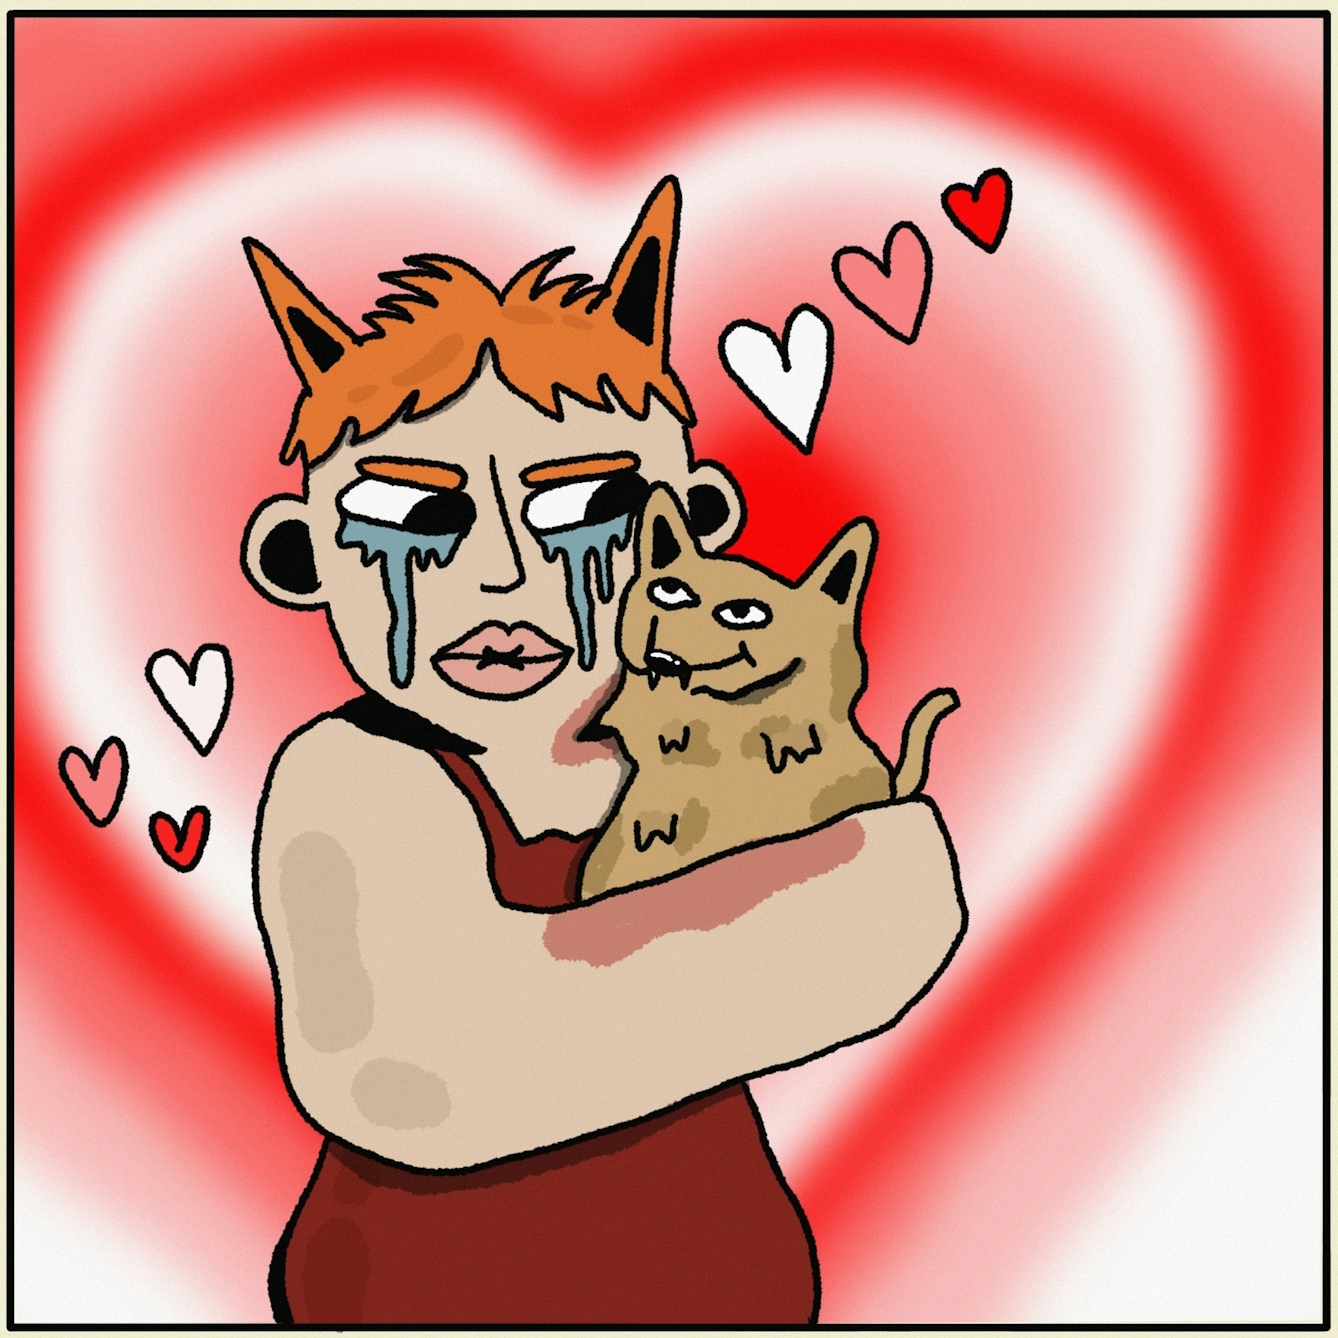 Panel 4 of a digitally drawn, four-panel comic titled ‘Zoning’. Your character, with their little self-control, is already hugging the dog. Their eyes are watery eyes and they’re surrounded in love hearts. 